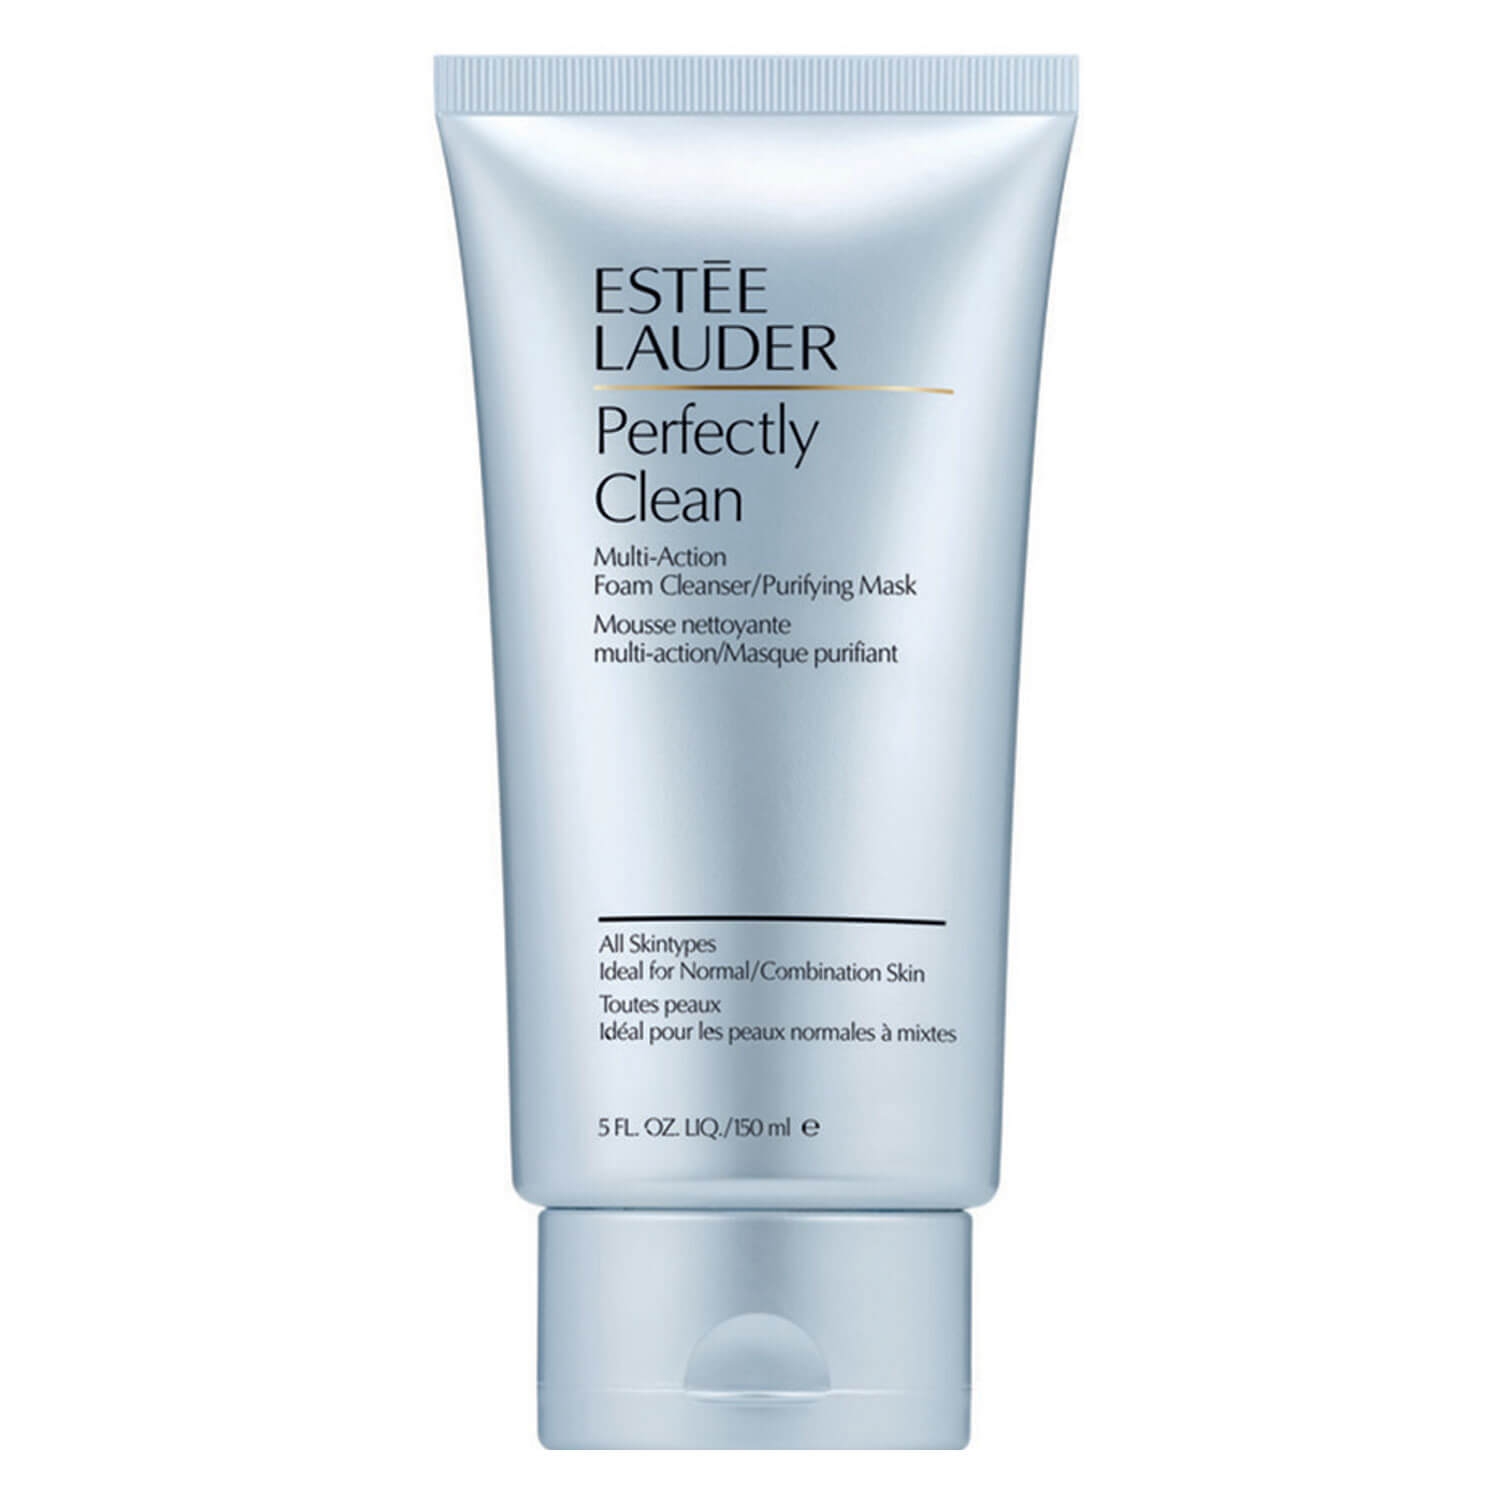 Produktbild von Perfectly Clean - Multi-Action Foam Cleanser/Purifying Mask